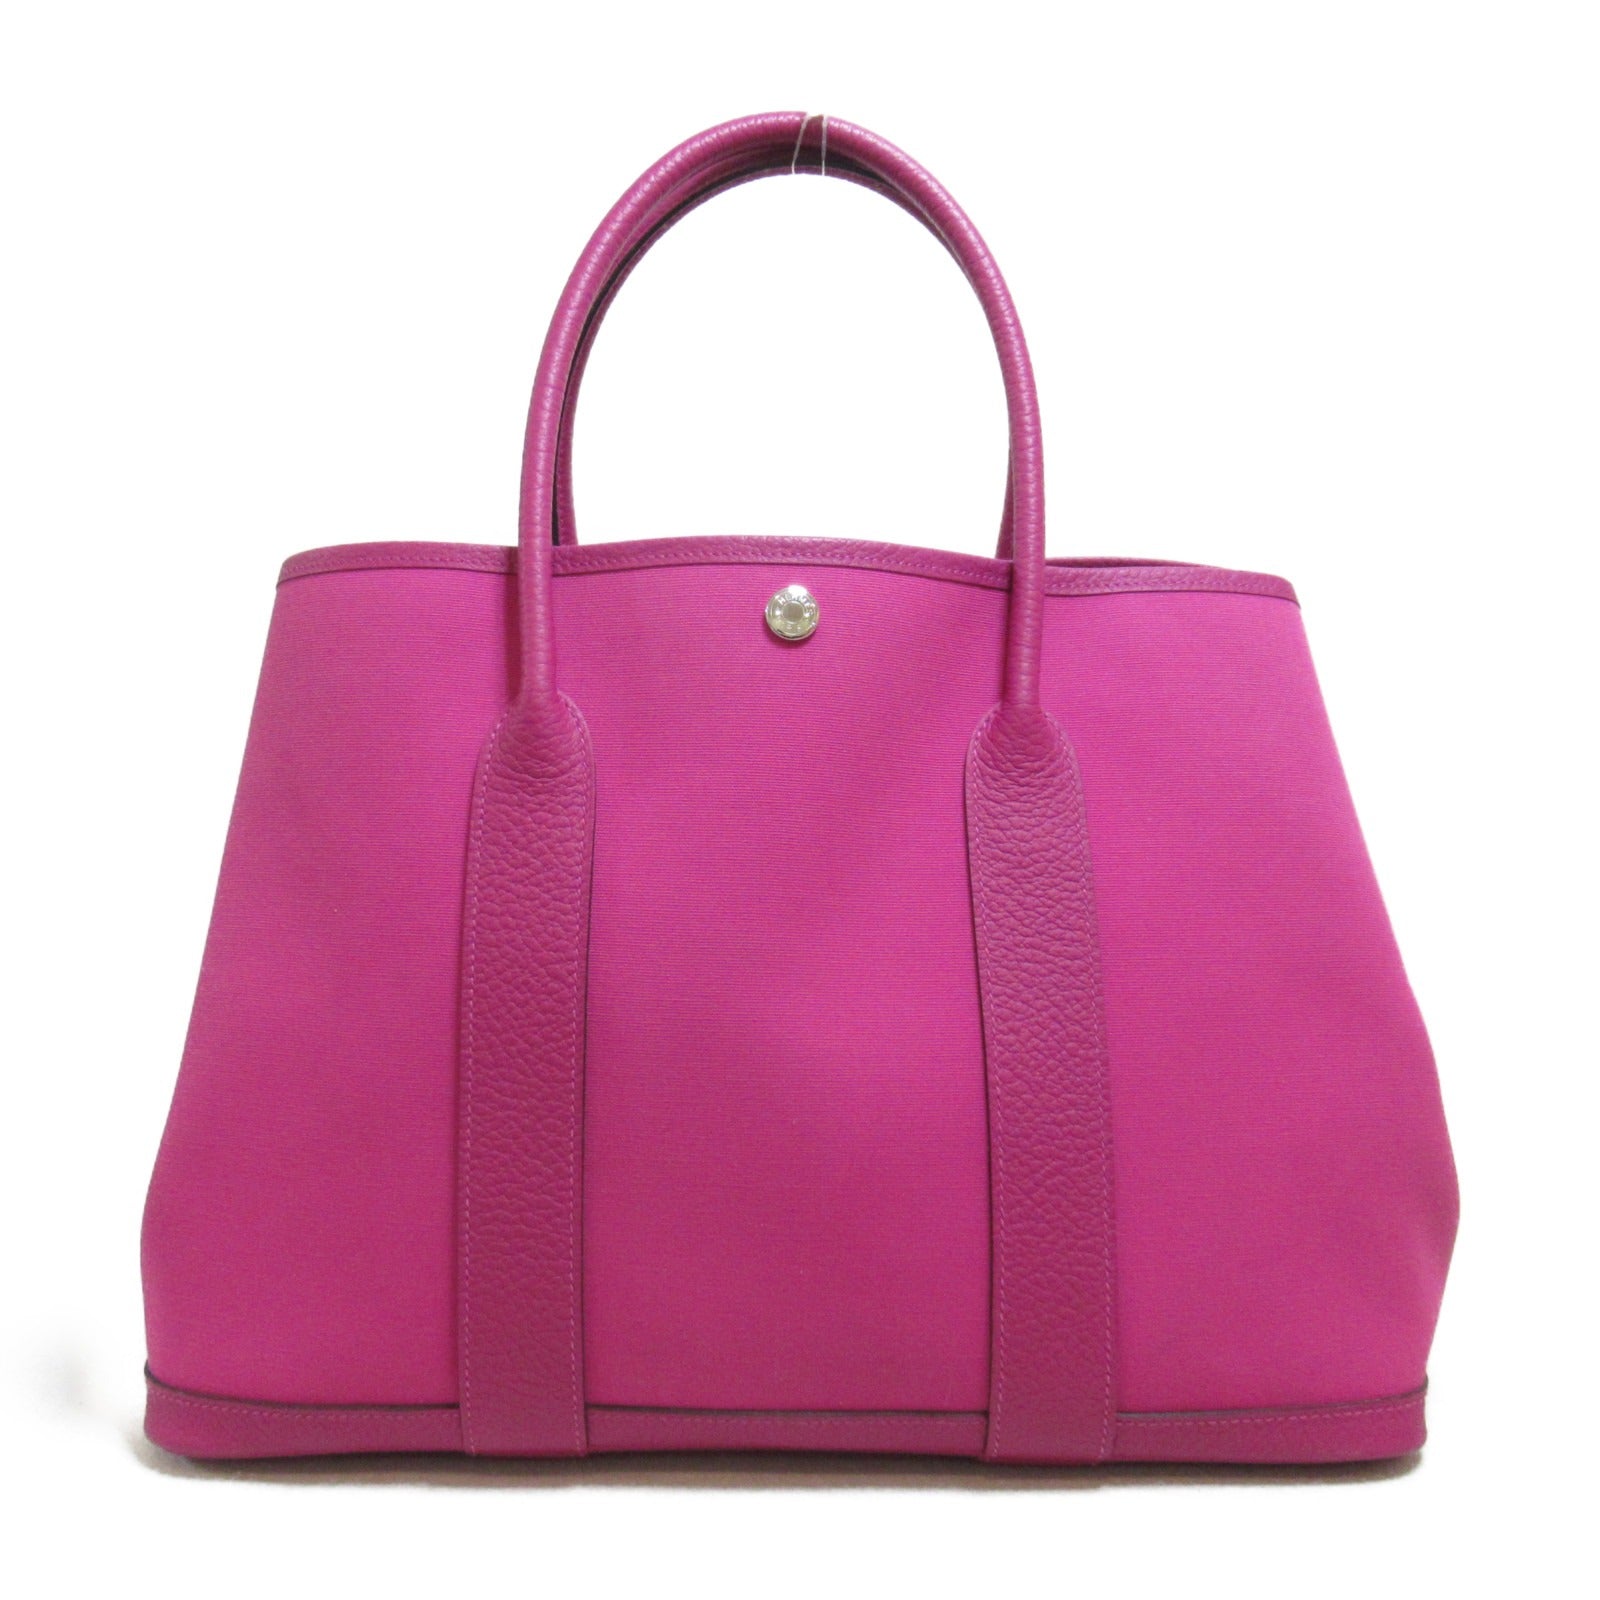 Hermes Hermes Garden Party PM Tote Bag Tote Bag Leather  Ophidia  Pink Collection